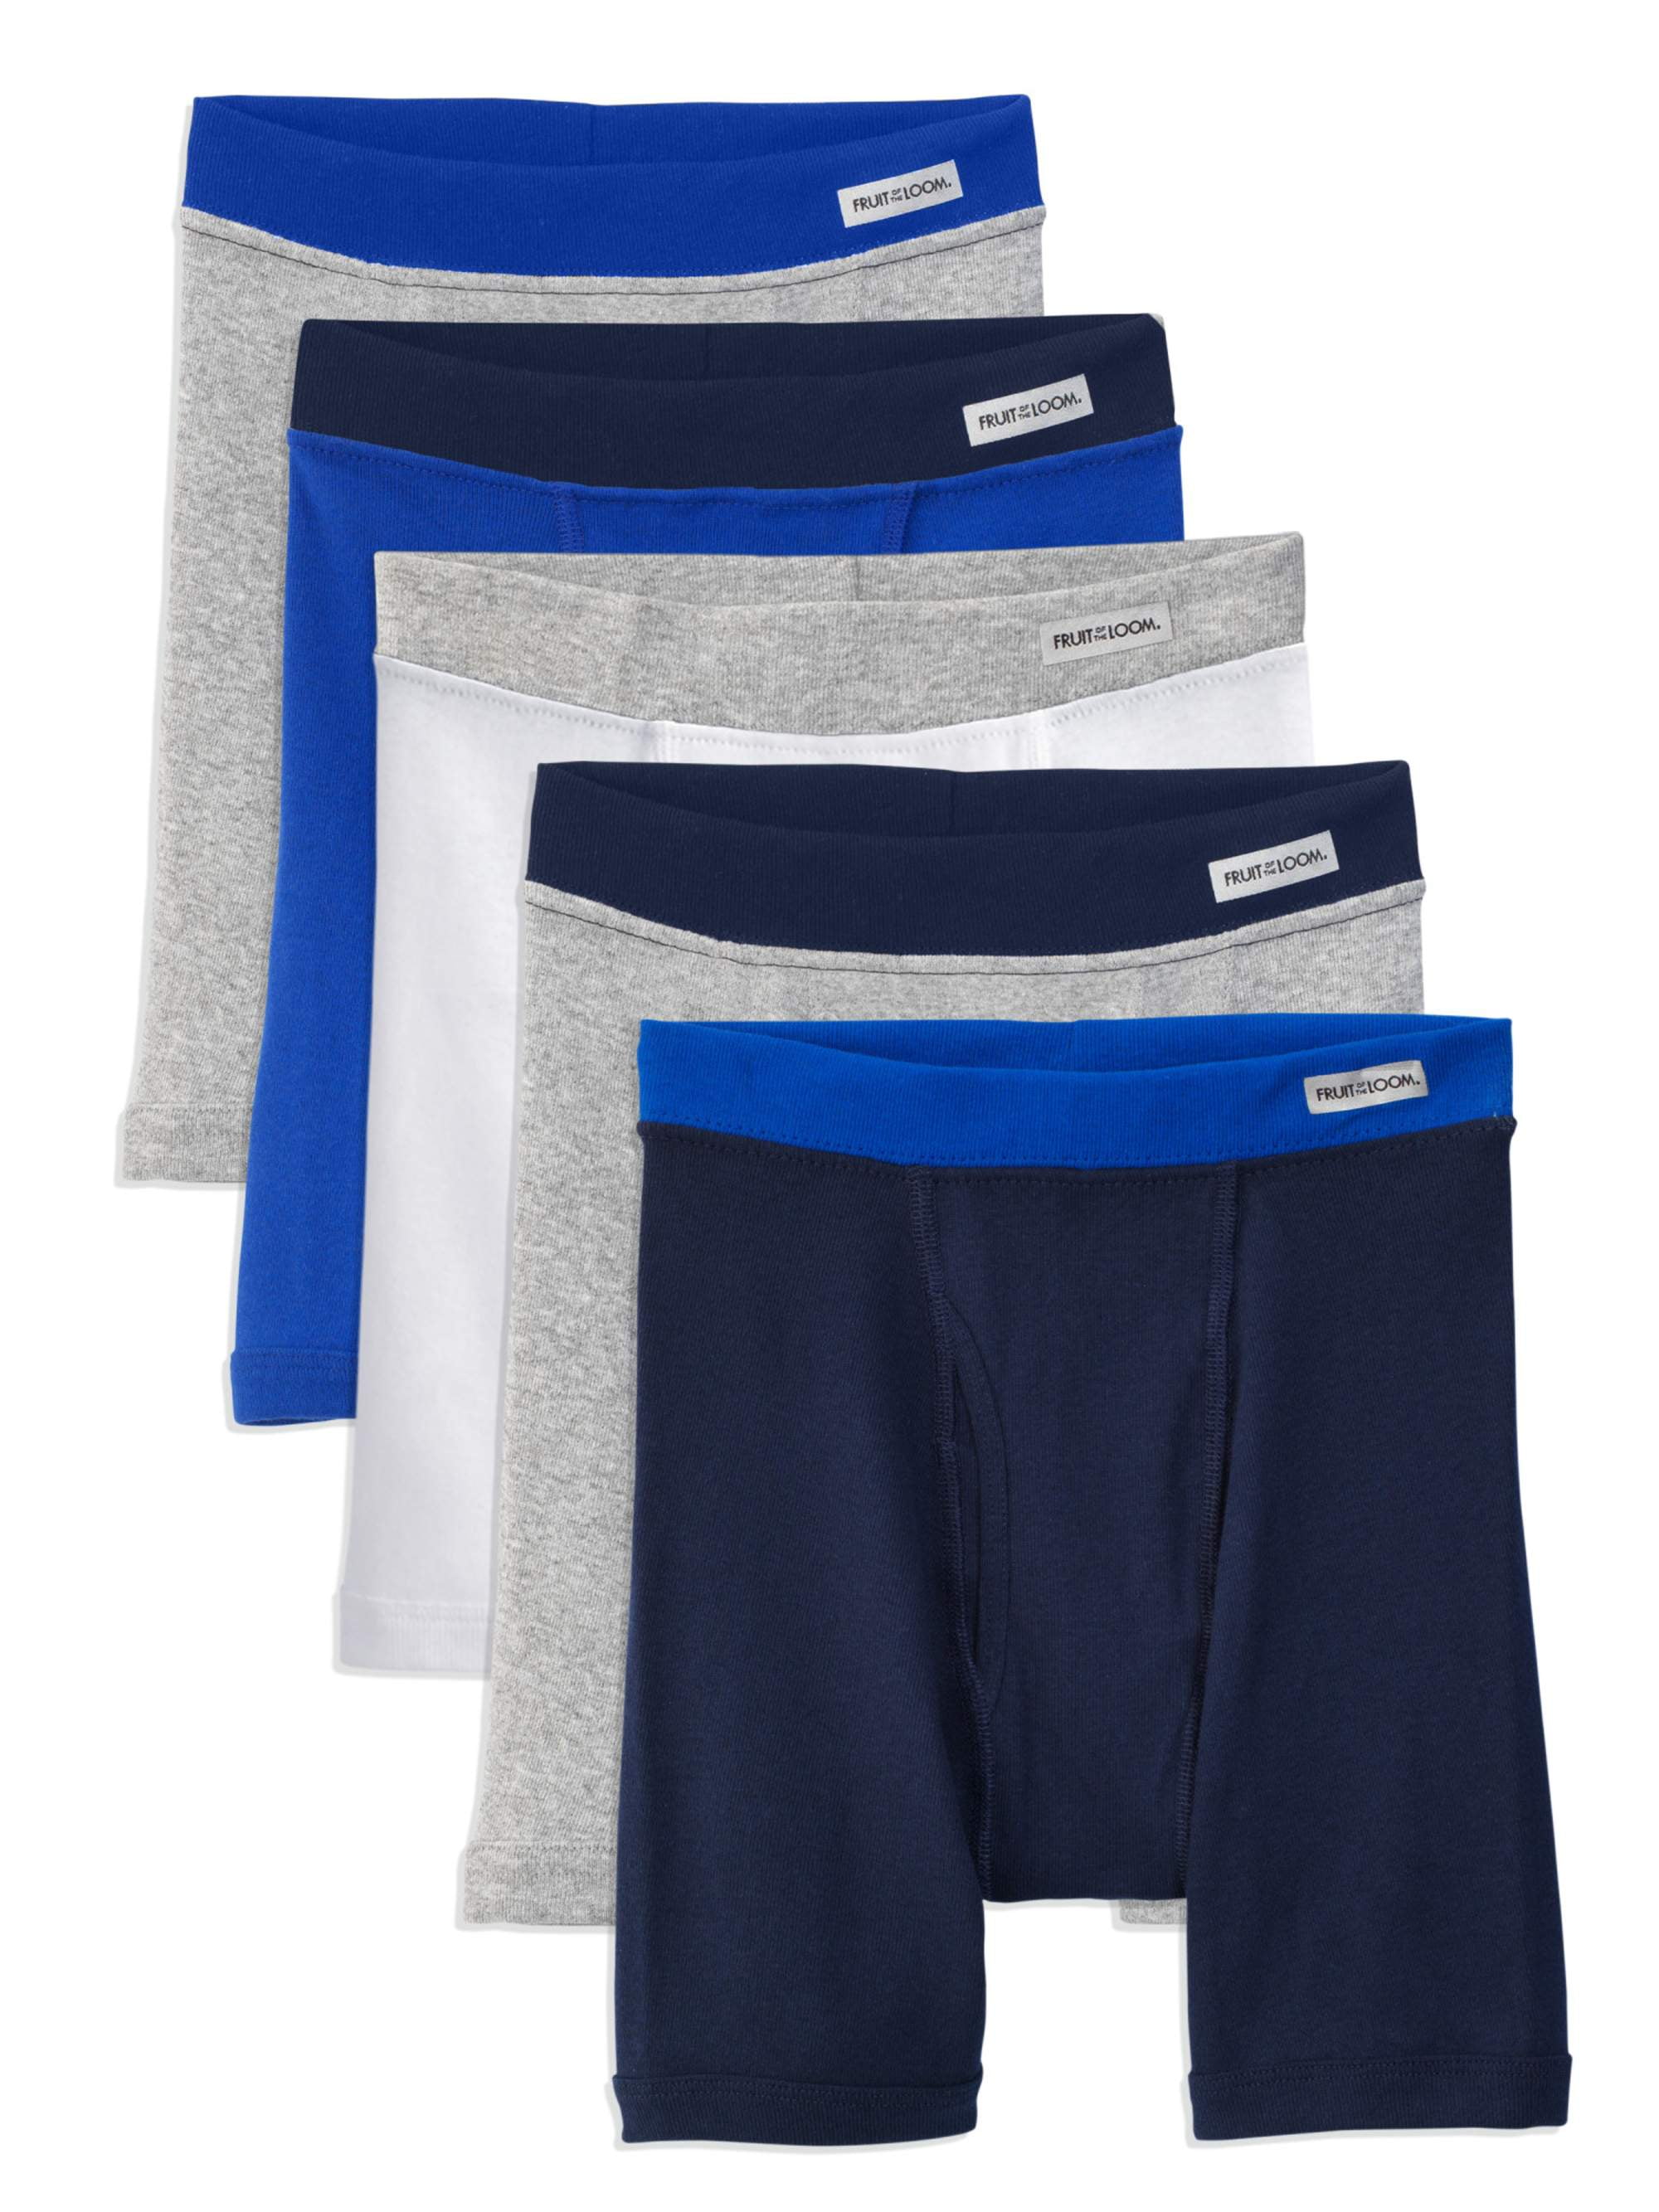 Fruit of the Loom Covered Waistband Cotton Boxer Briefs, 5 Pack (Little  Boys & Big Boys) 